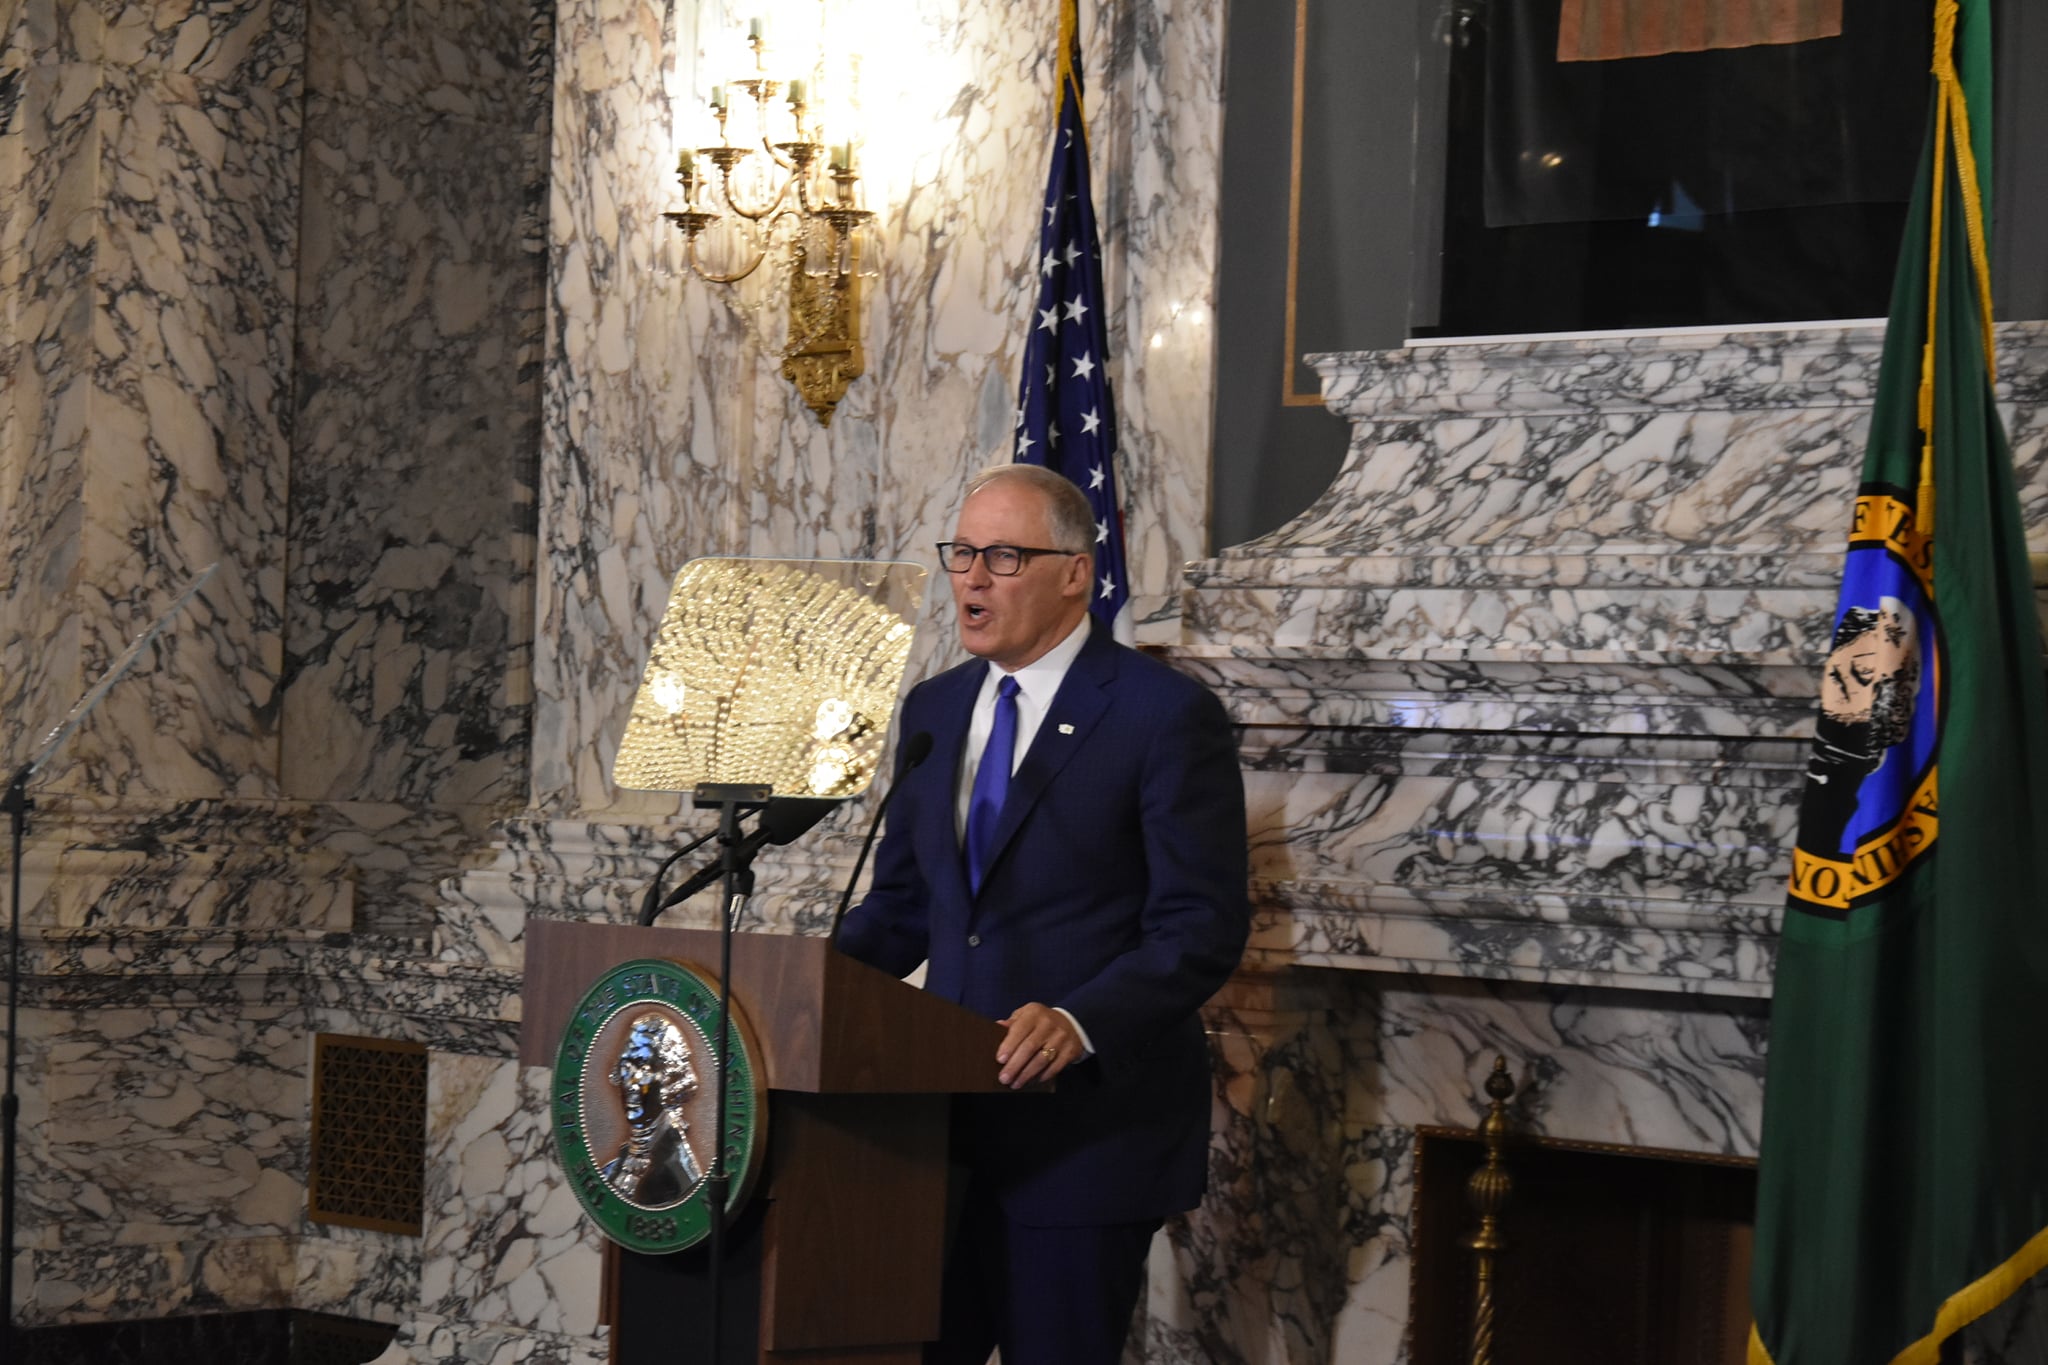 Governor Jay Inslee speaking in Jan 2022